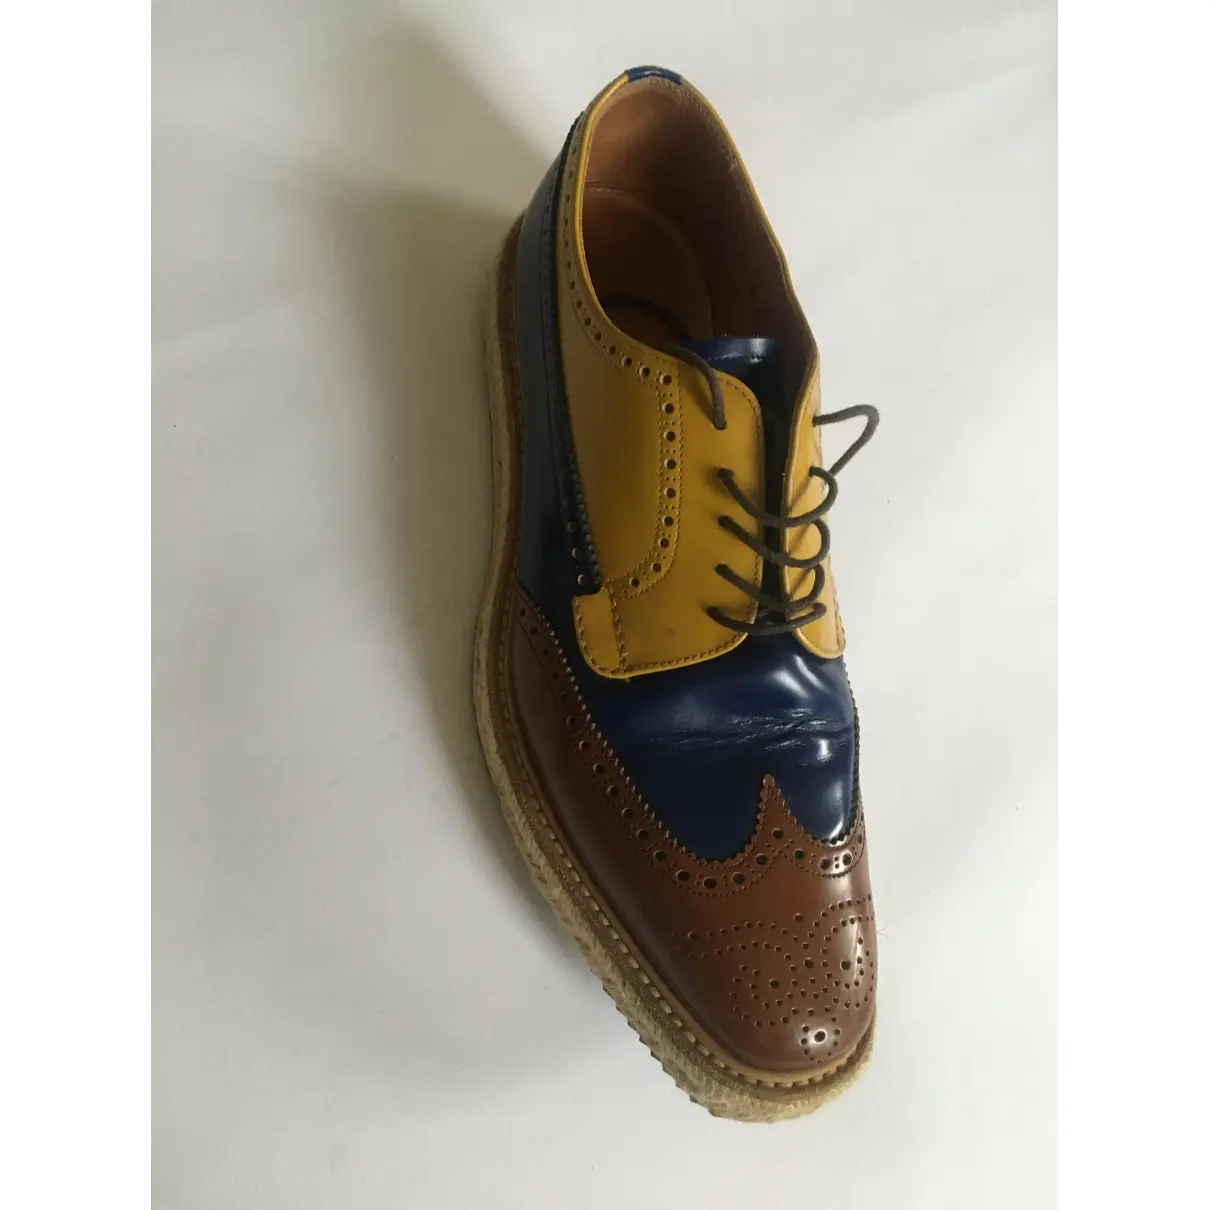 Prada Patent leather lace ups for sale